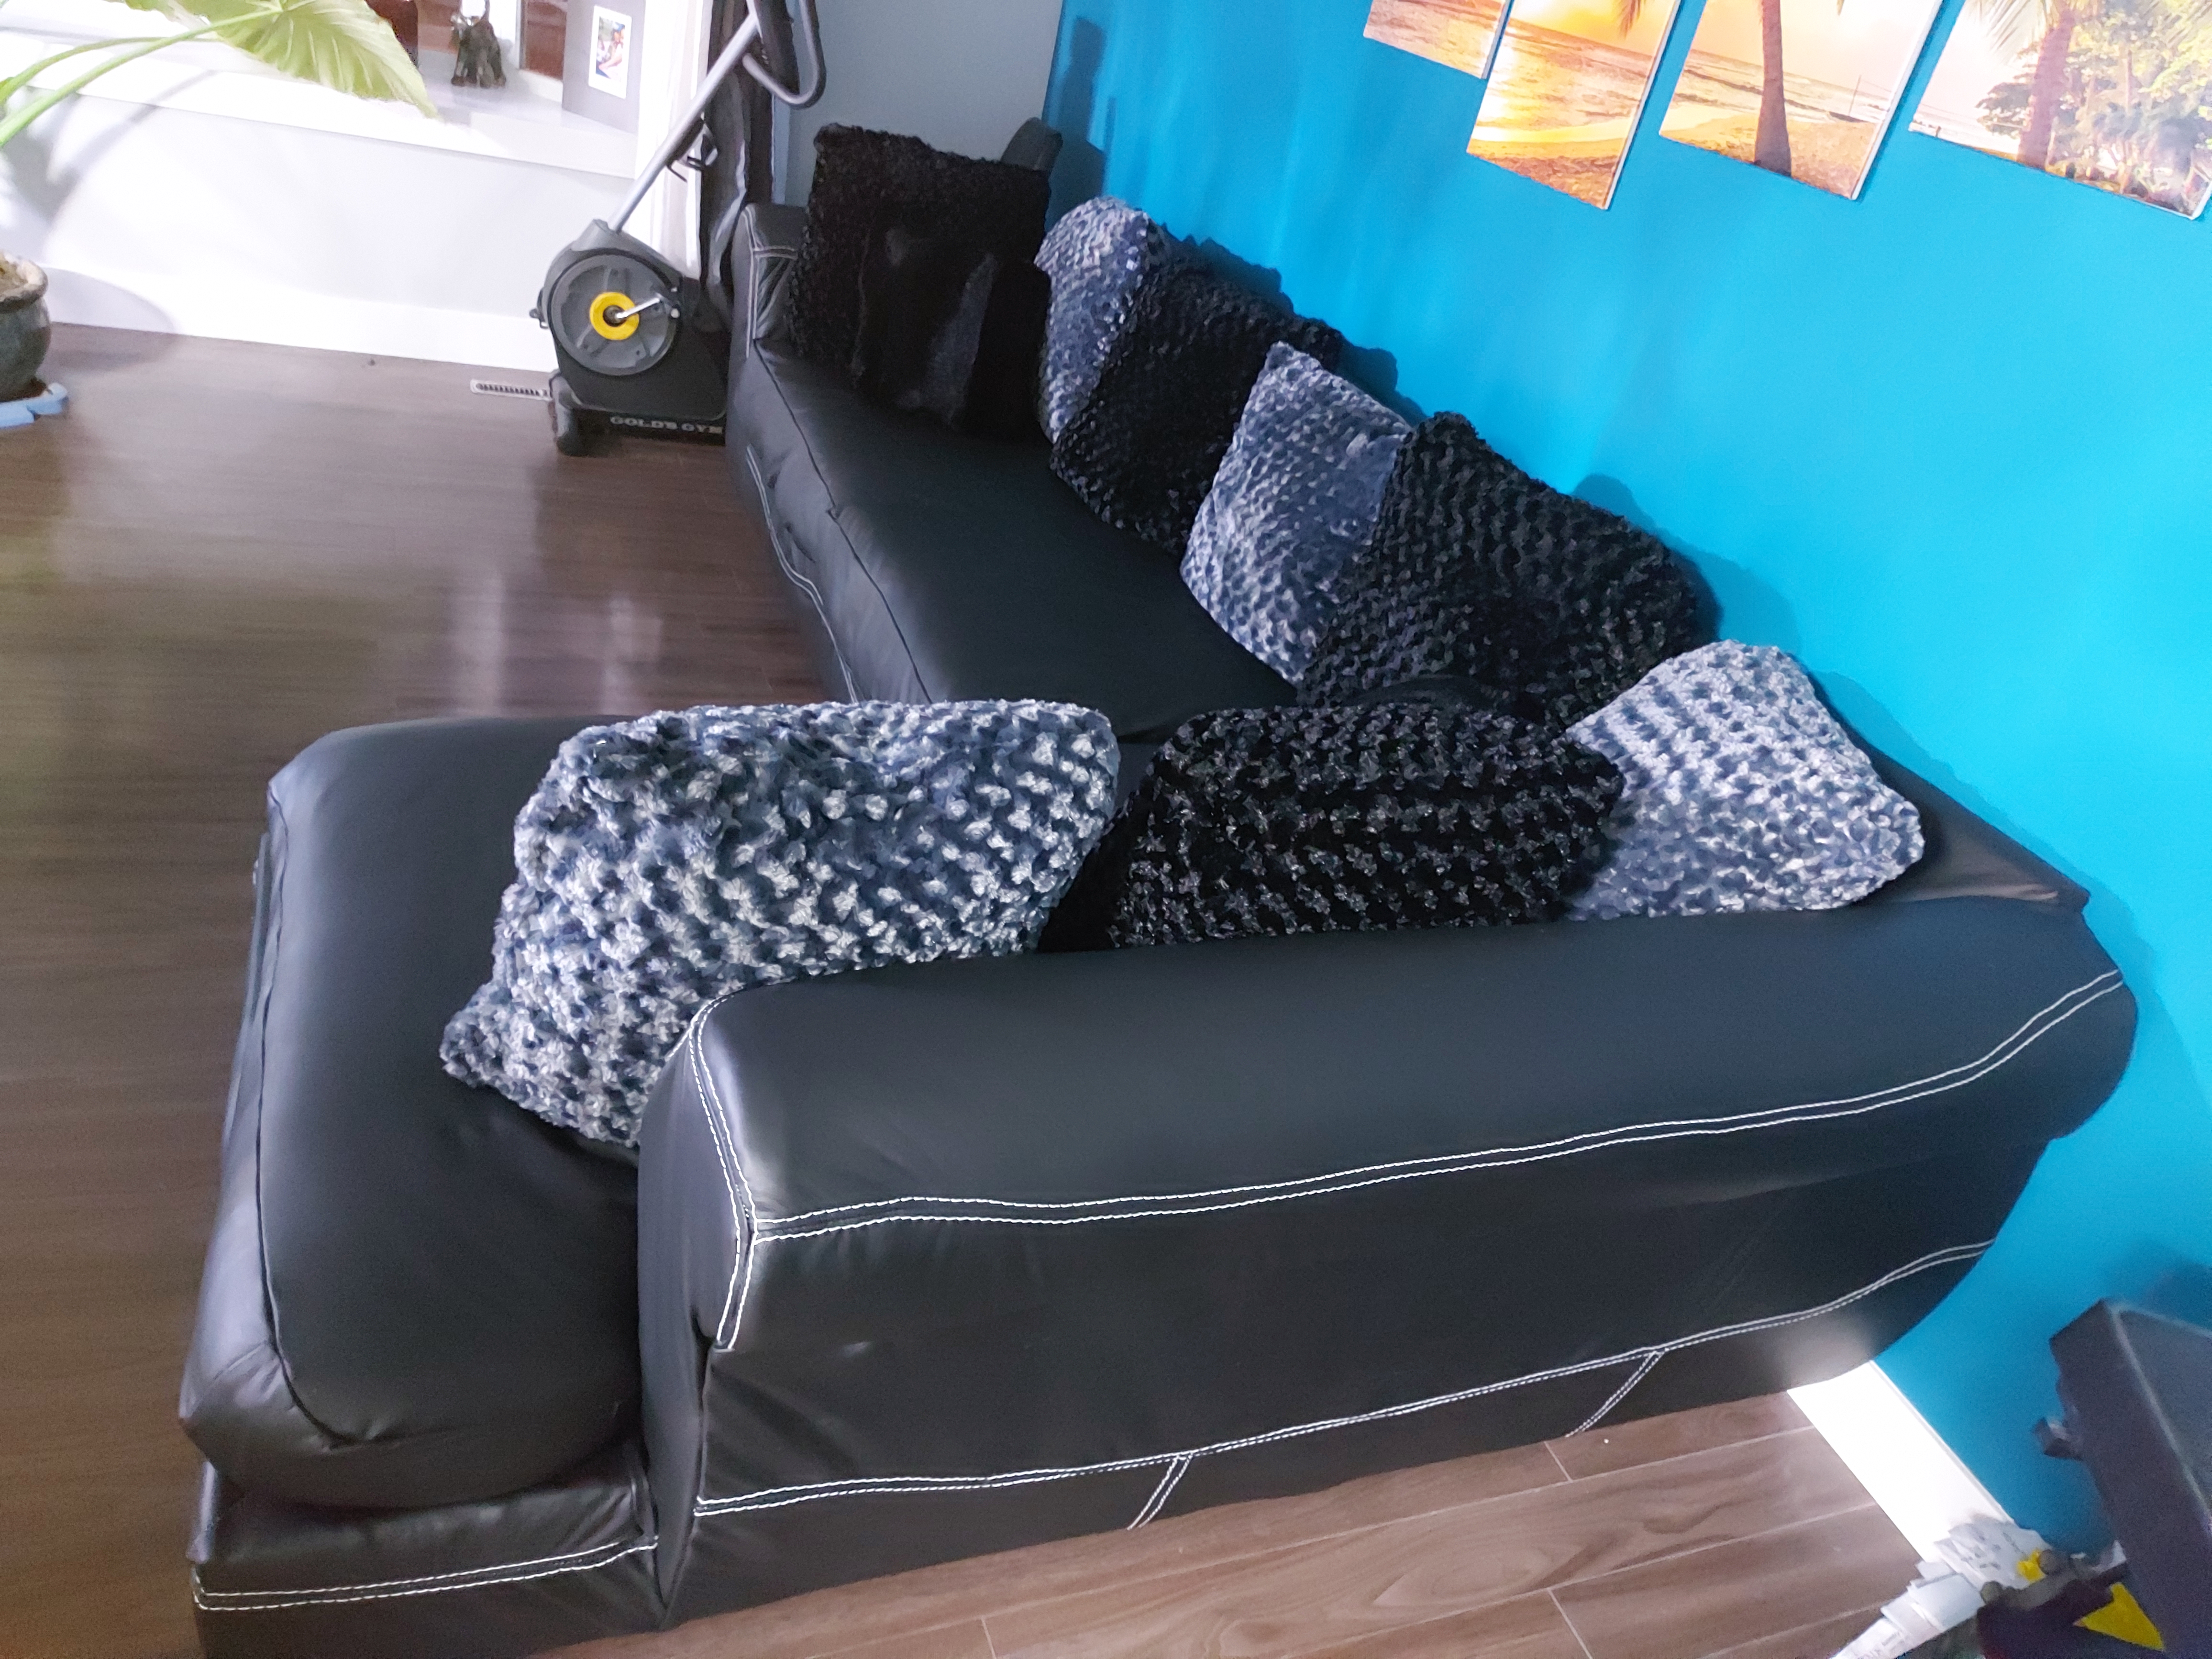 Leather Couch Recovered After